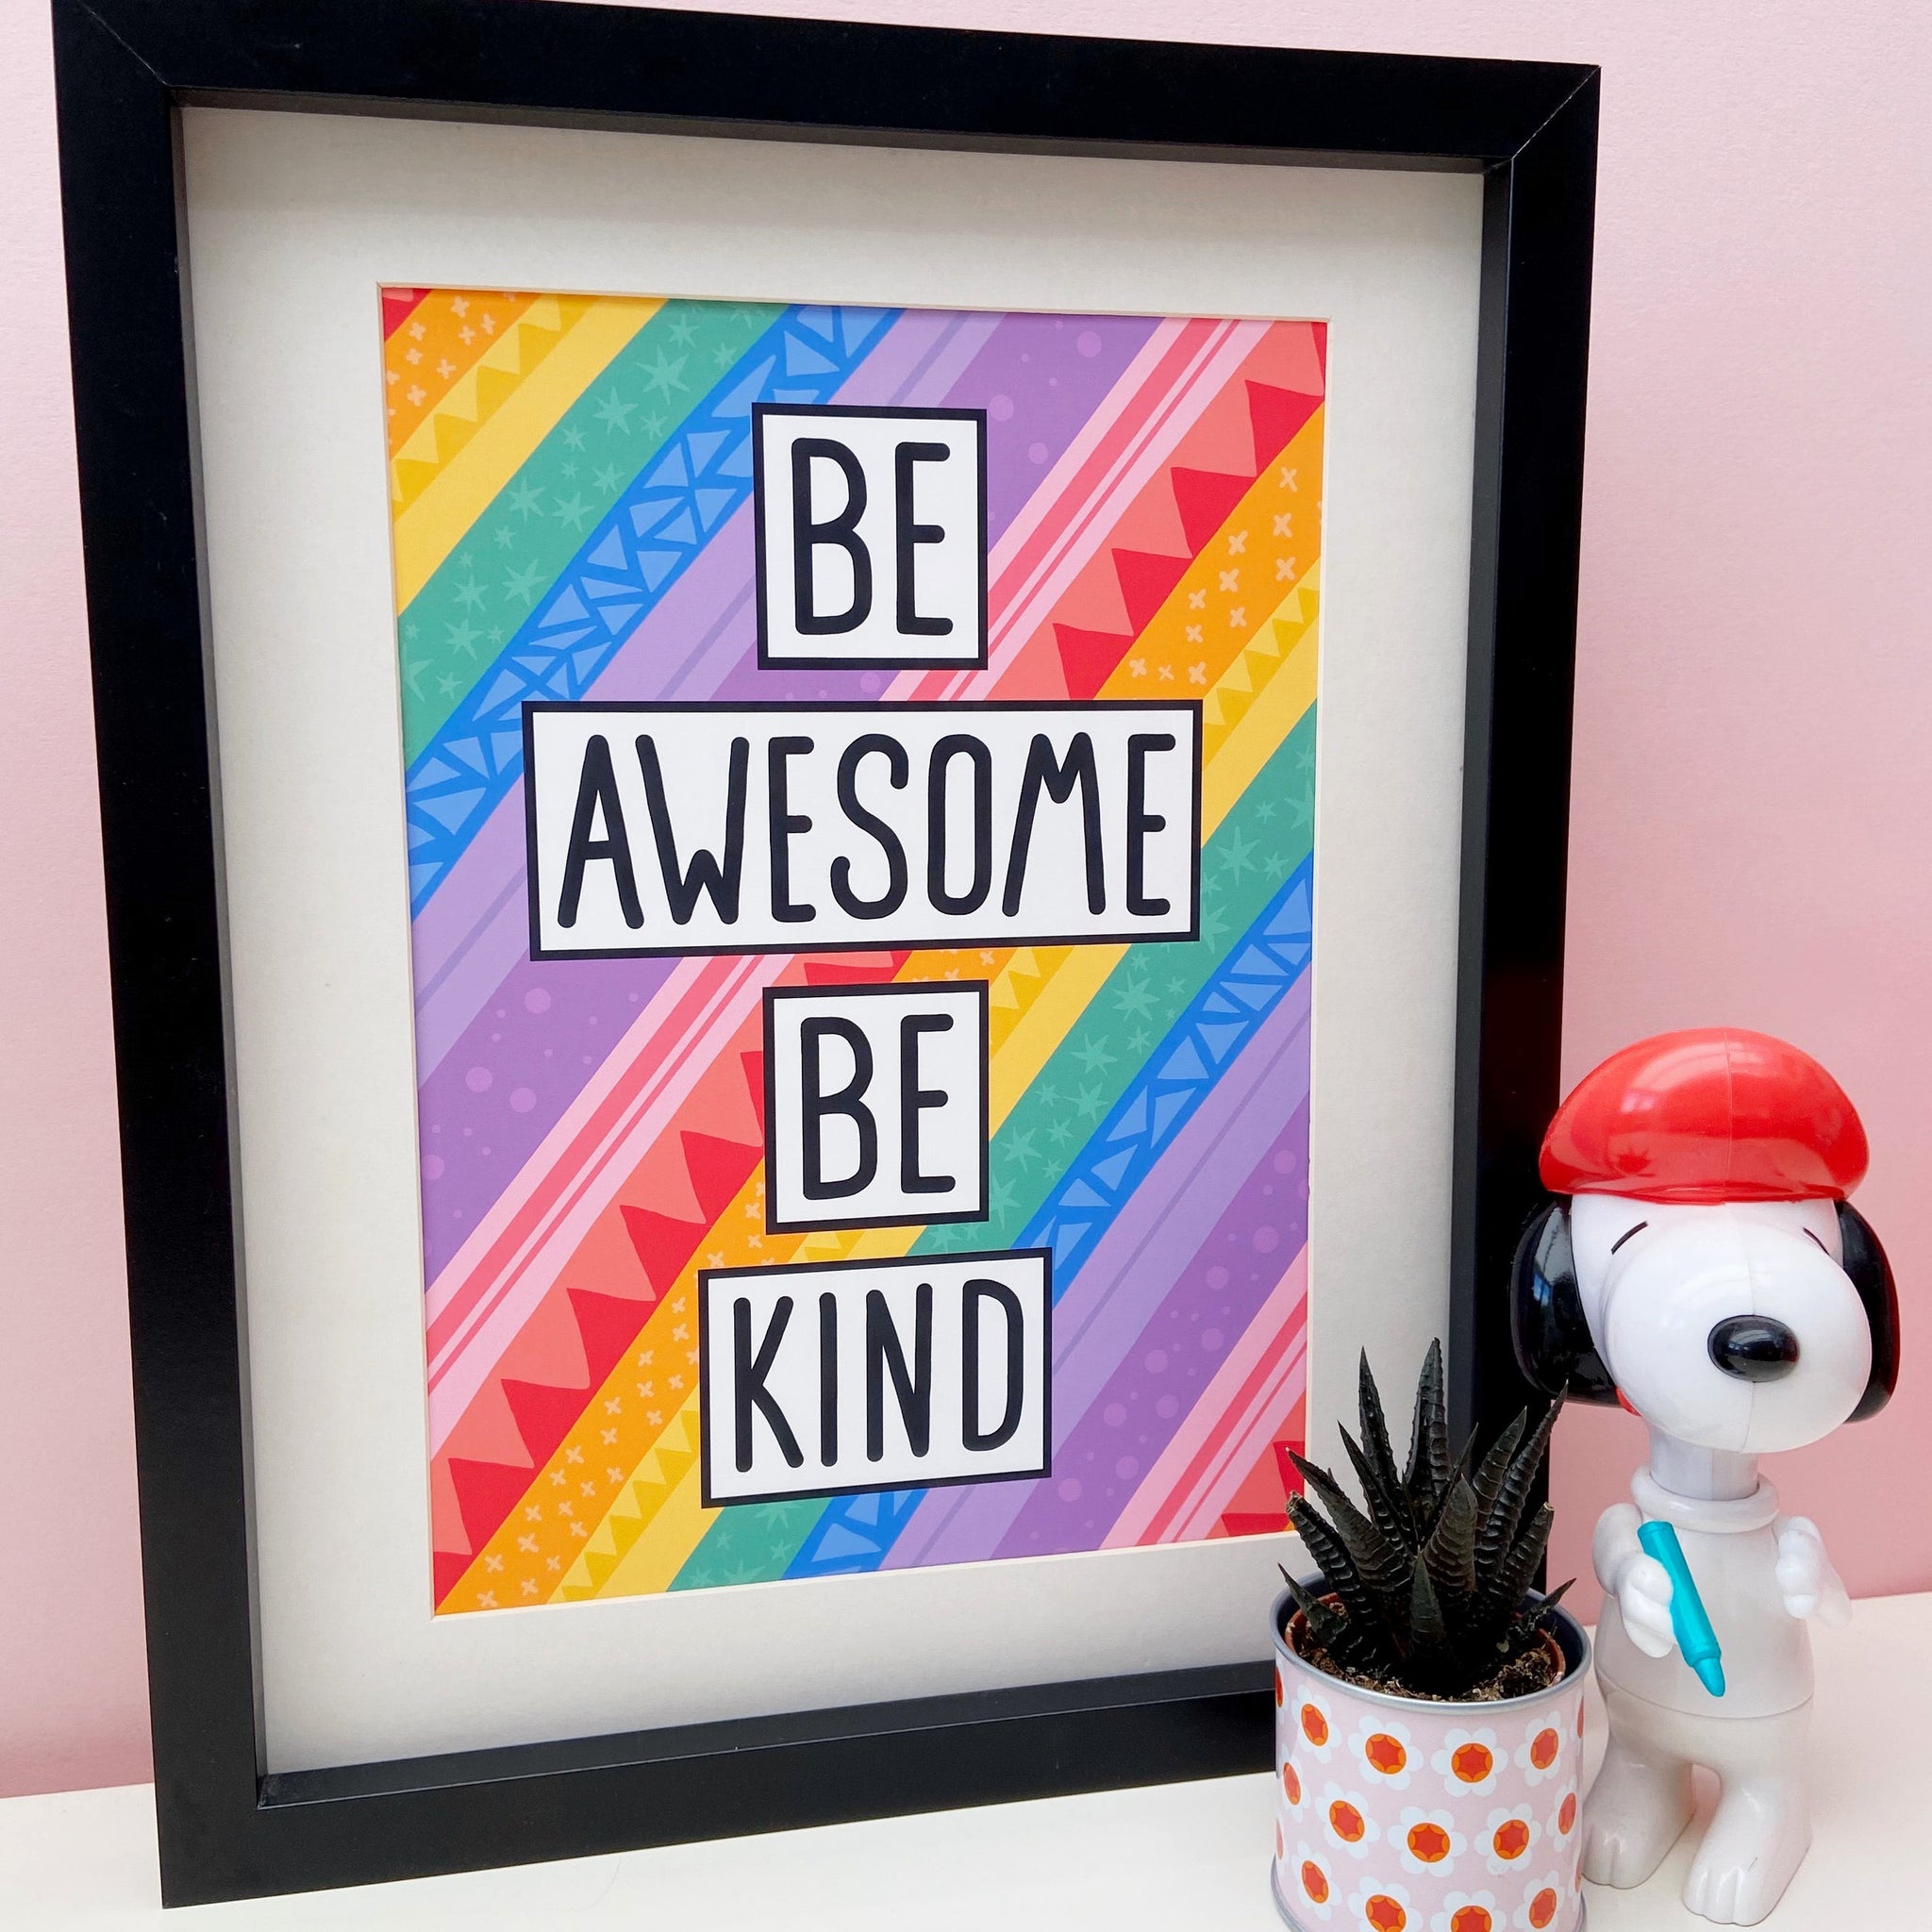 Be Awesome Be Kind Print